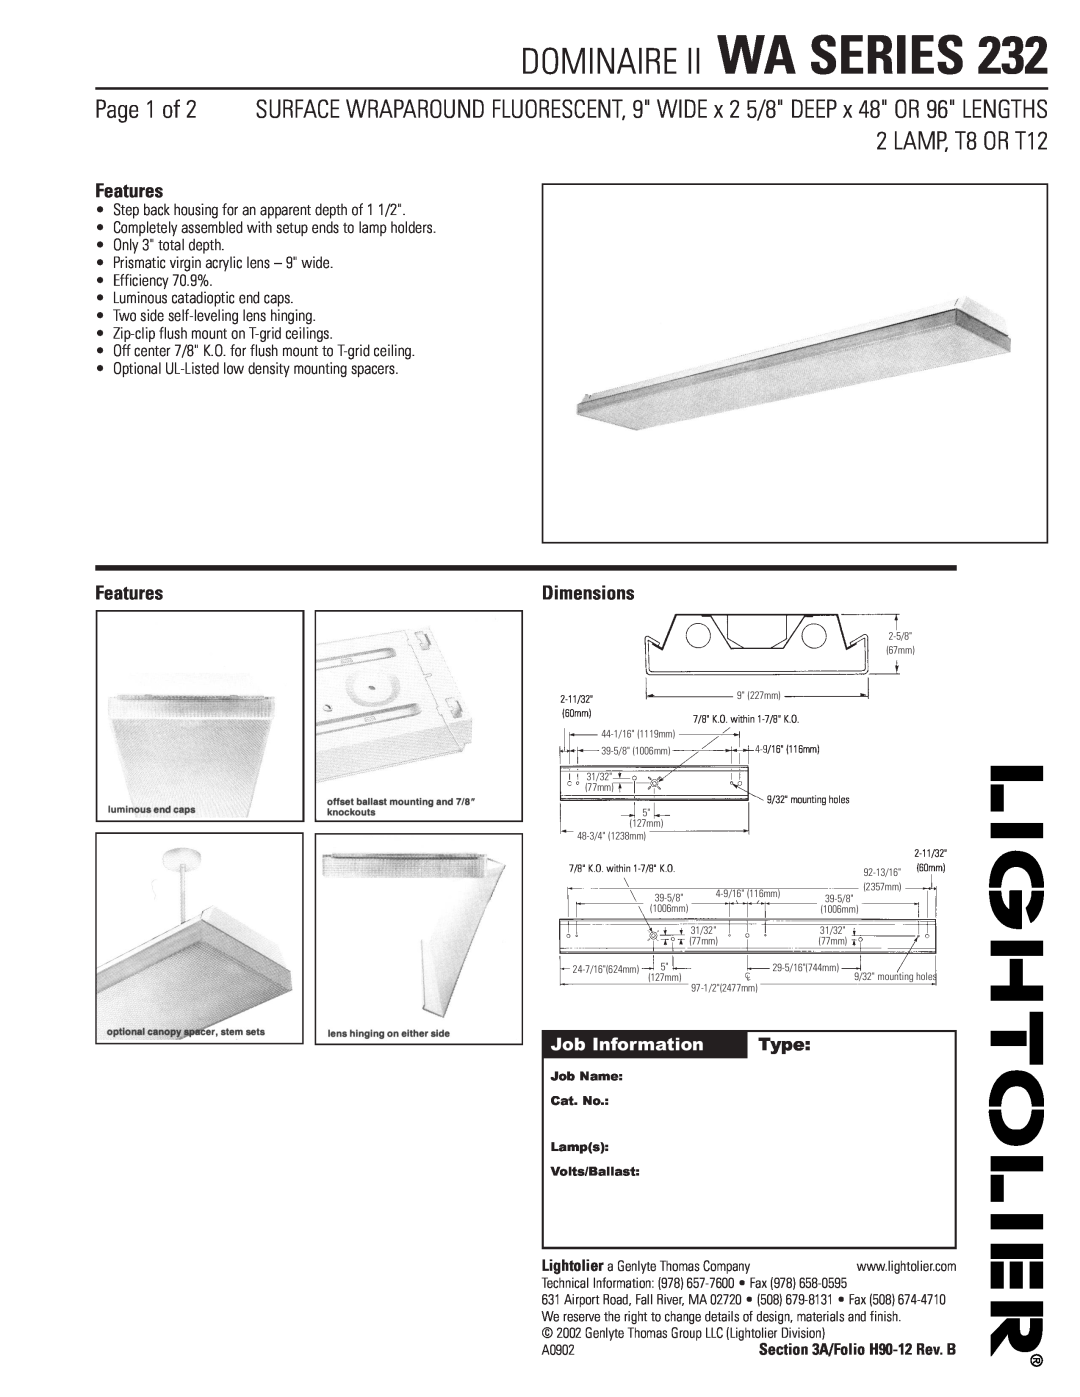 Lightolier WA Series 232 dimensions Dominaire Ii Wa Series, Features, Job Information, Type, Dimensions 